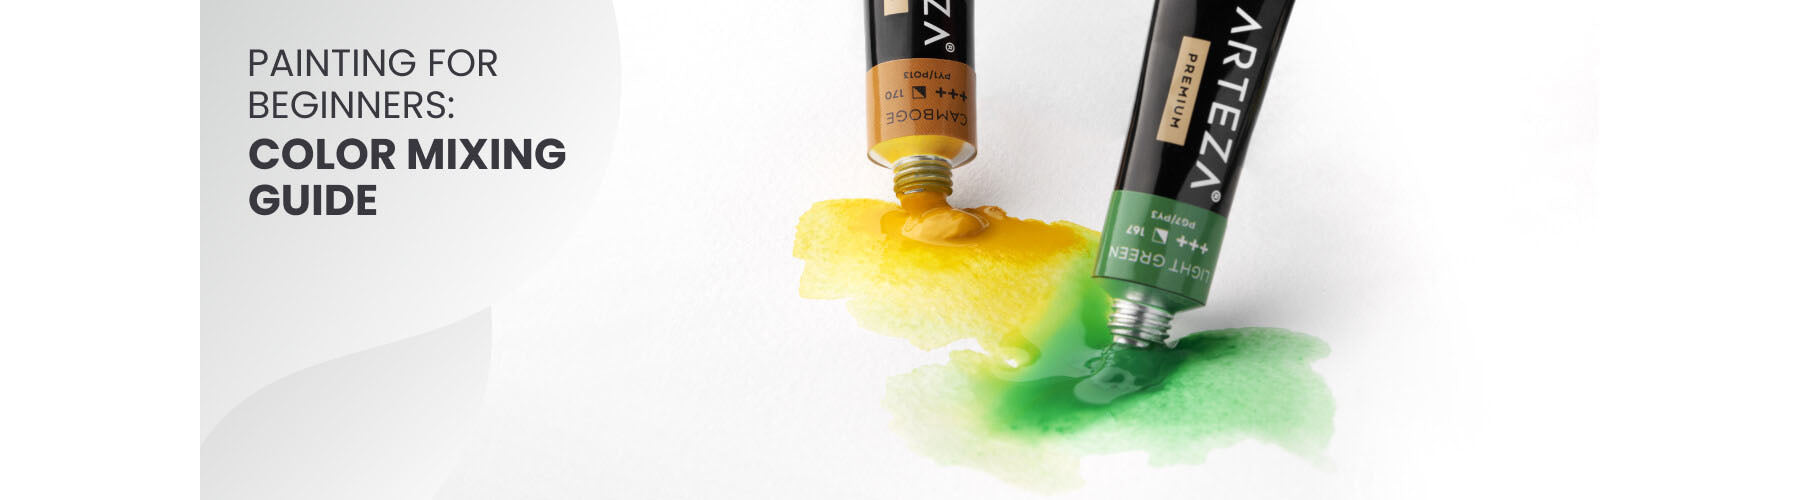 How to Mix Acrylic Paints: An Artist's Guide to Creating Colors